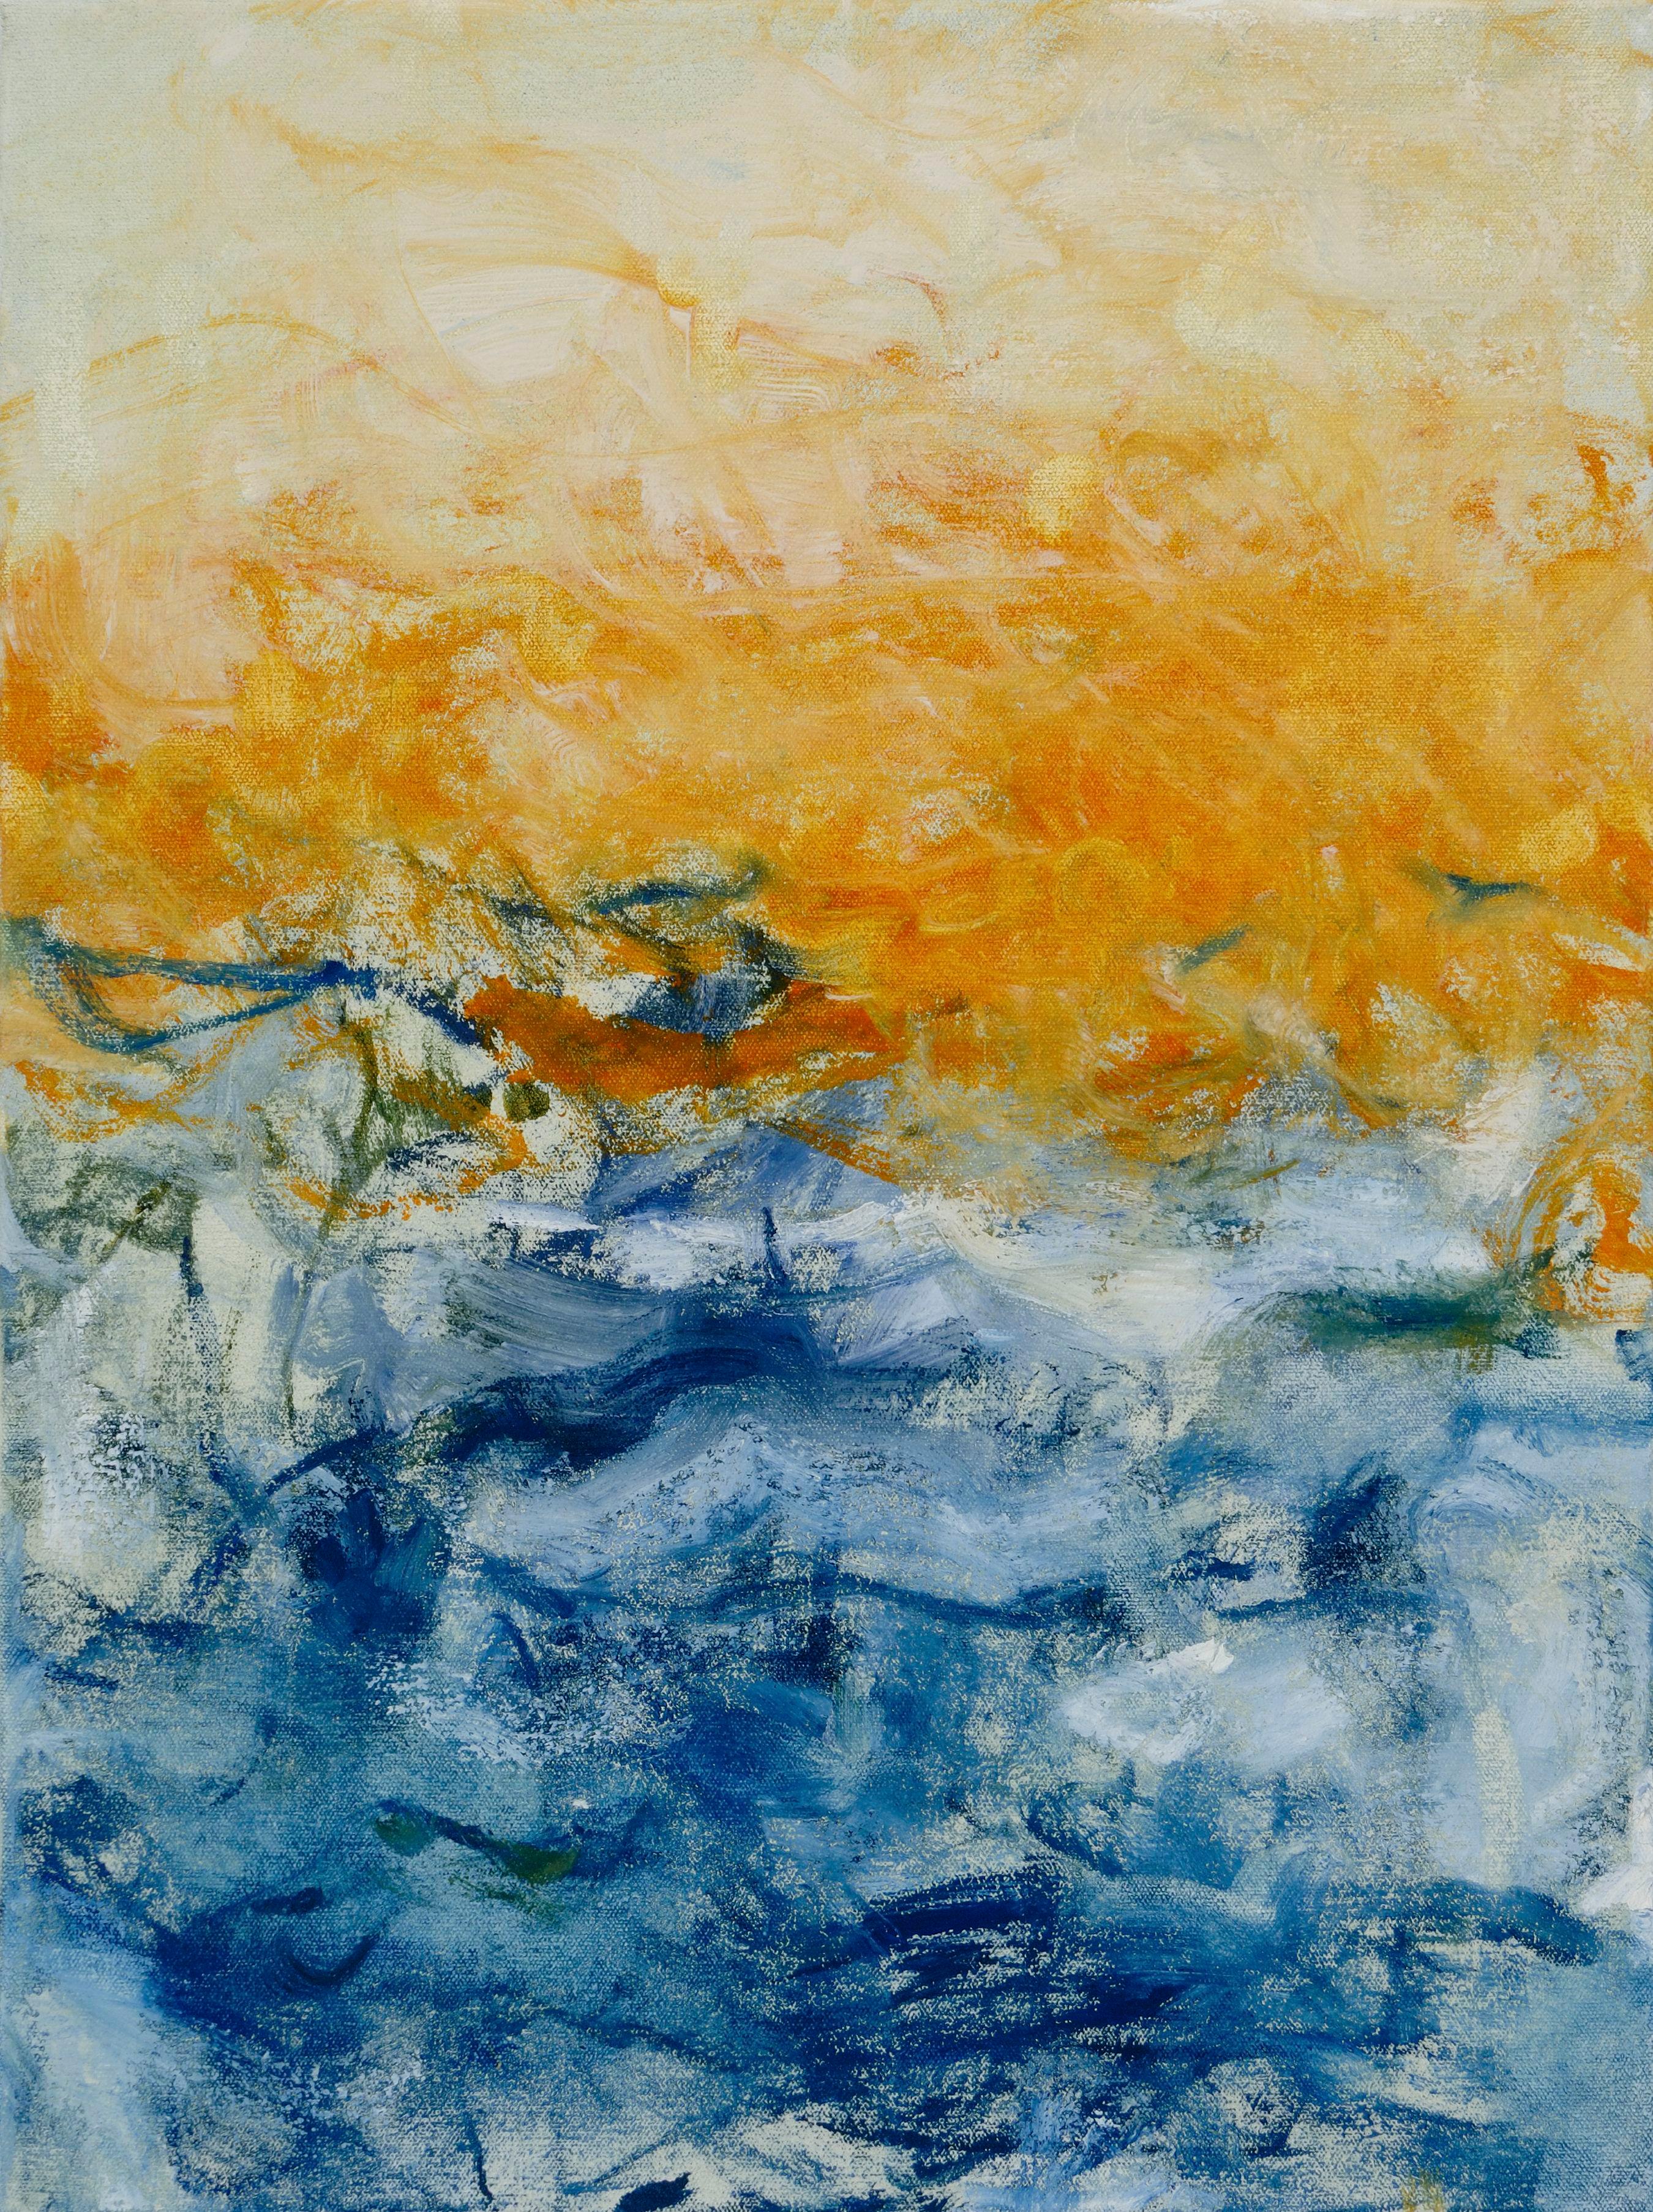 Anne Raymond Abstract Painting - Beach Series IV, Abstract Seascape Painting, Oil on Canvas, Signed 